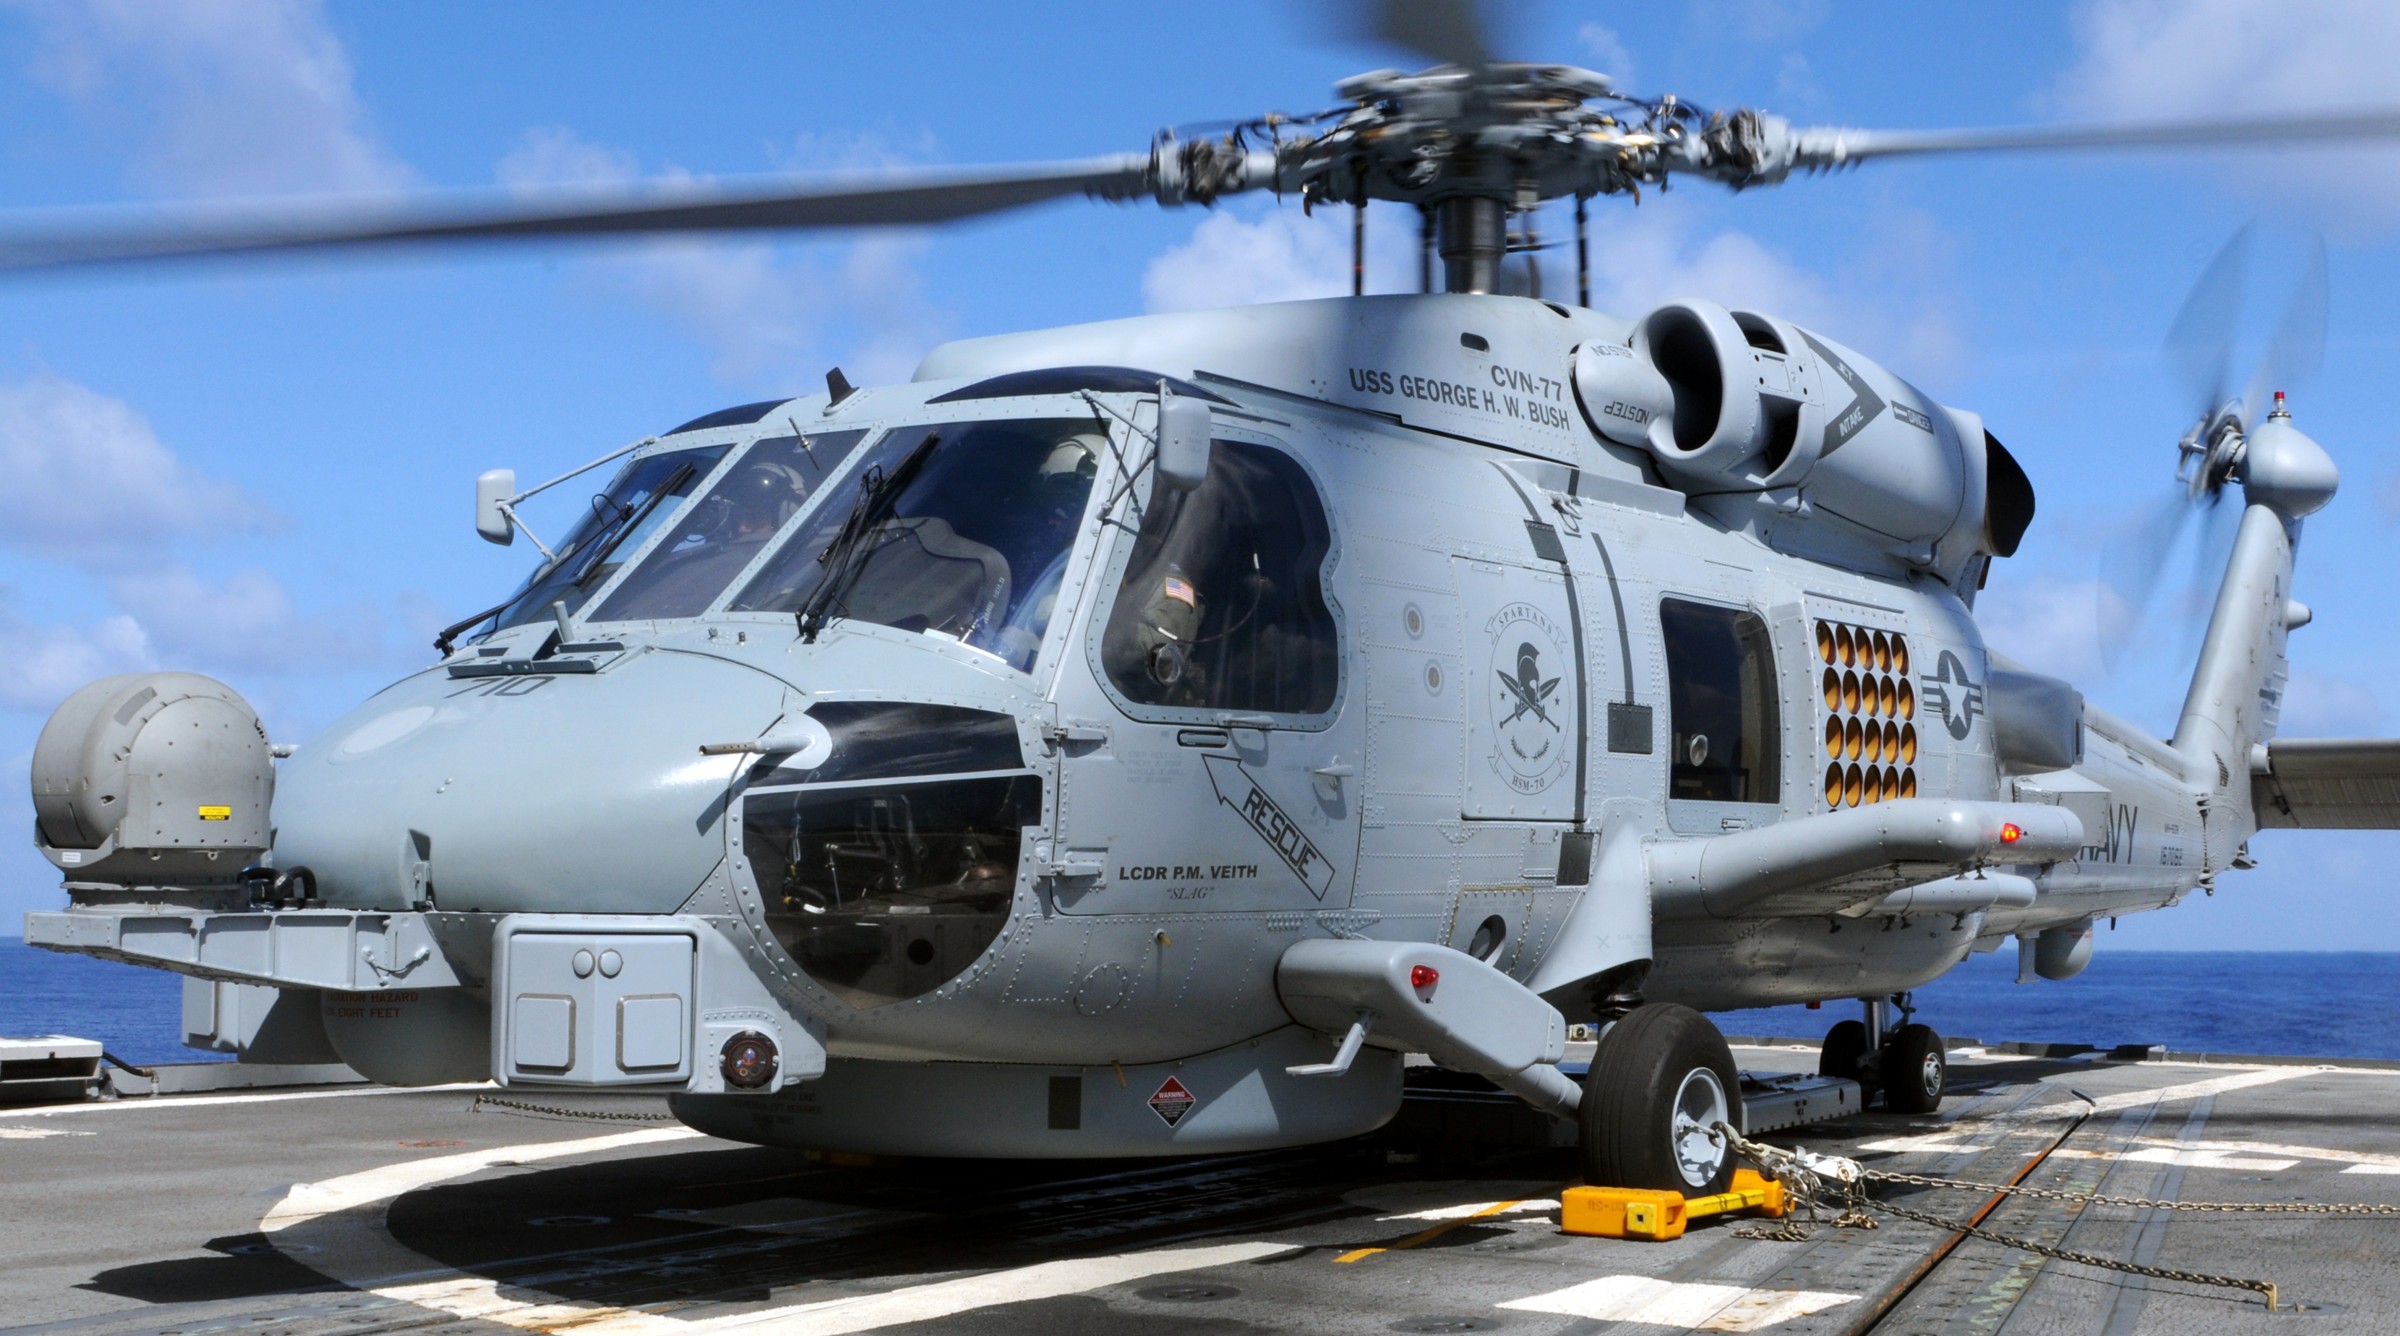 hsm-70 spartans helicopter maritime strike squadron mh-60r seahawk 2013 35